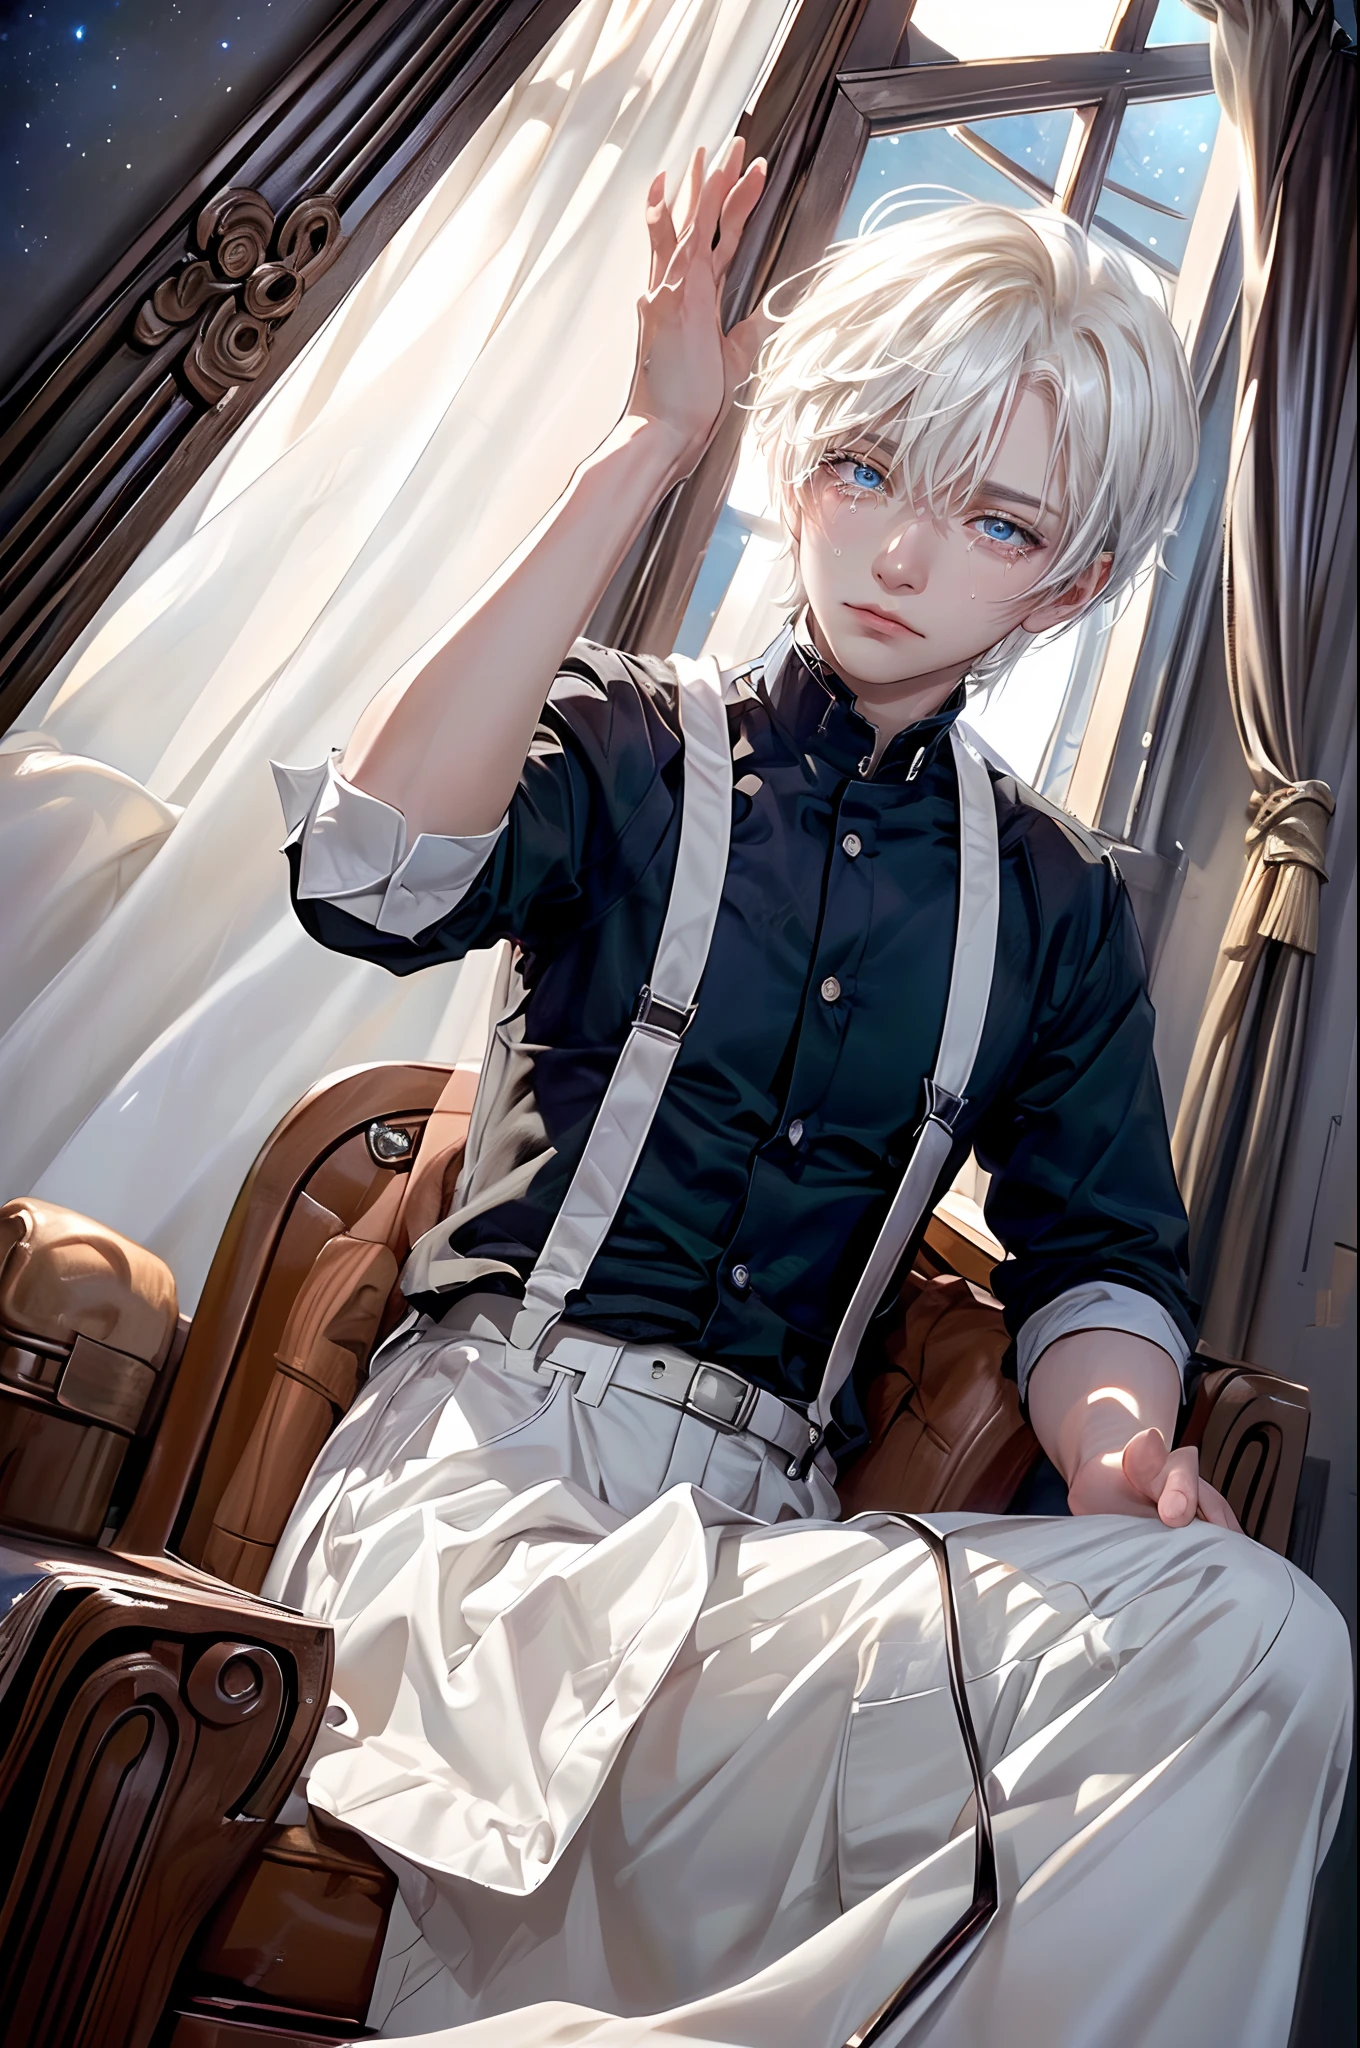 ((4K works))、​masterpiece、(top-quality)、One beautiful boy、Slim body、tall、((Black Y-shirt and white pants、Charming British knight style))、Please wear one jacket、(Detailed beautiful eyes)、Fantastic Night、((You can see the starry sky from the window))、Fantastic room at midnight、((Face similar to Carly Rae Jepsen))、((Short-haired white hair))、((Smaller face))、((Neutral face))、((Bright blue eyes))、((American adult male))、((Adult male 26 years old))、((Cool Men))、((Like a celebrity))、((Crying expression))、((sad look))、((Korean Makeup))、((elongated and sharp eyes))、((Happy dating))、((boyish))、((Upper body photography))、Professional Photos、((Shot alone))、((Shot from his front))、((Gentle expression))、((He is in front of the viewer))、((He comforts me))、((He's in the corner of the room))、((He reaches out here))、Solitude、saddened、desolate、suffocating、heartbreaking、auw、agony、